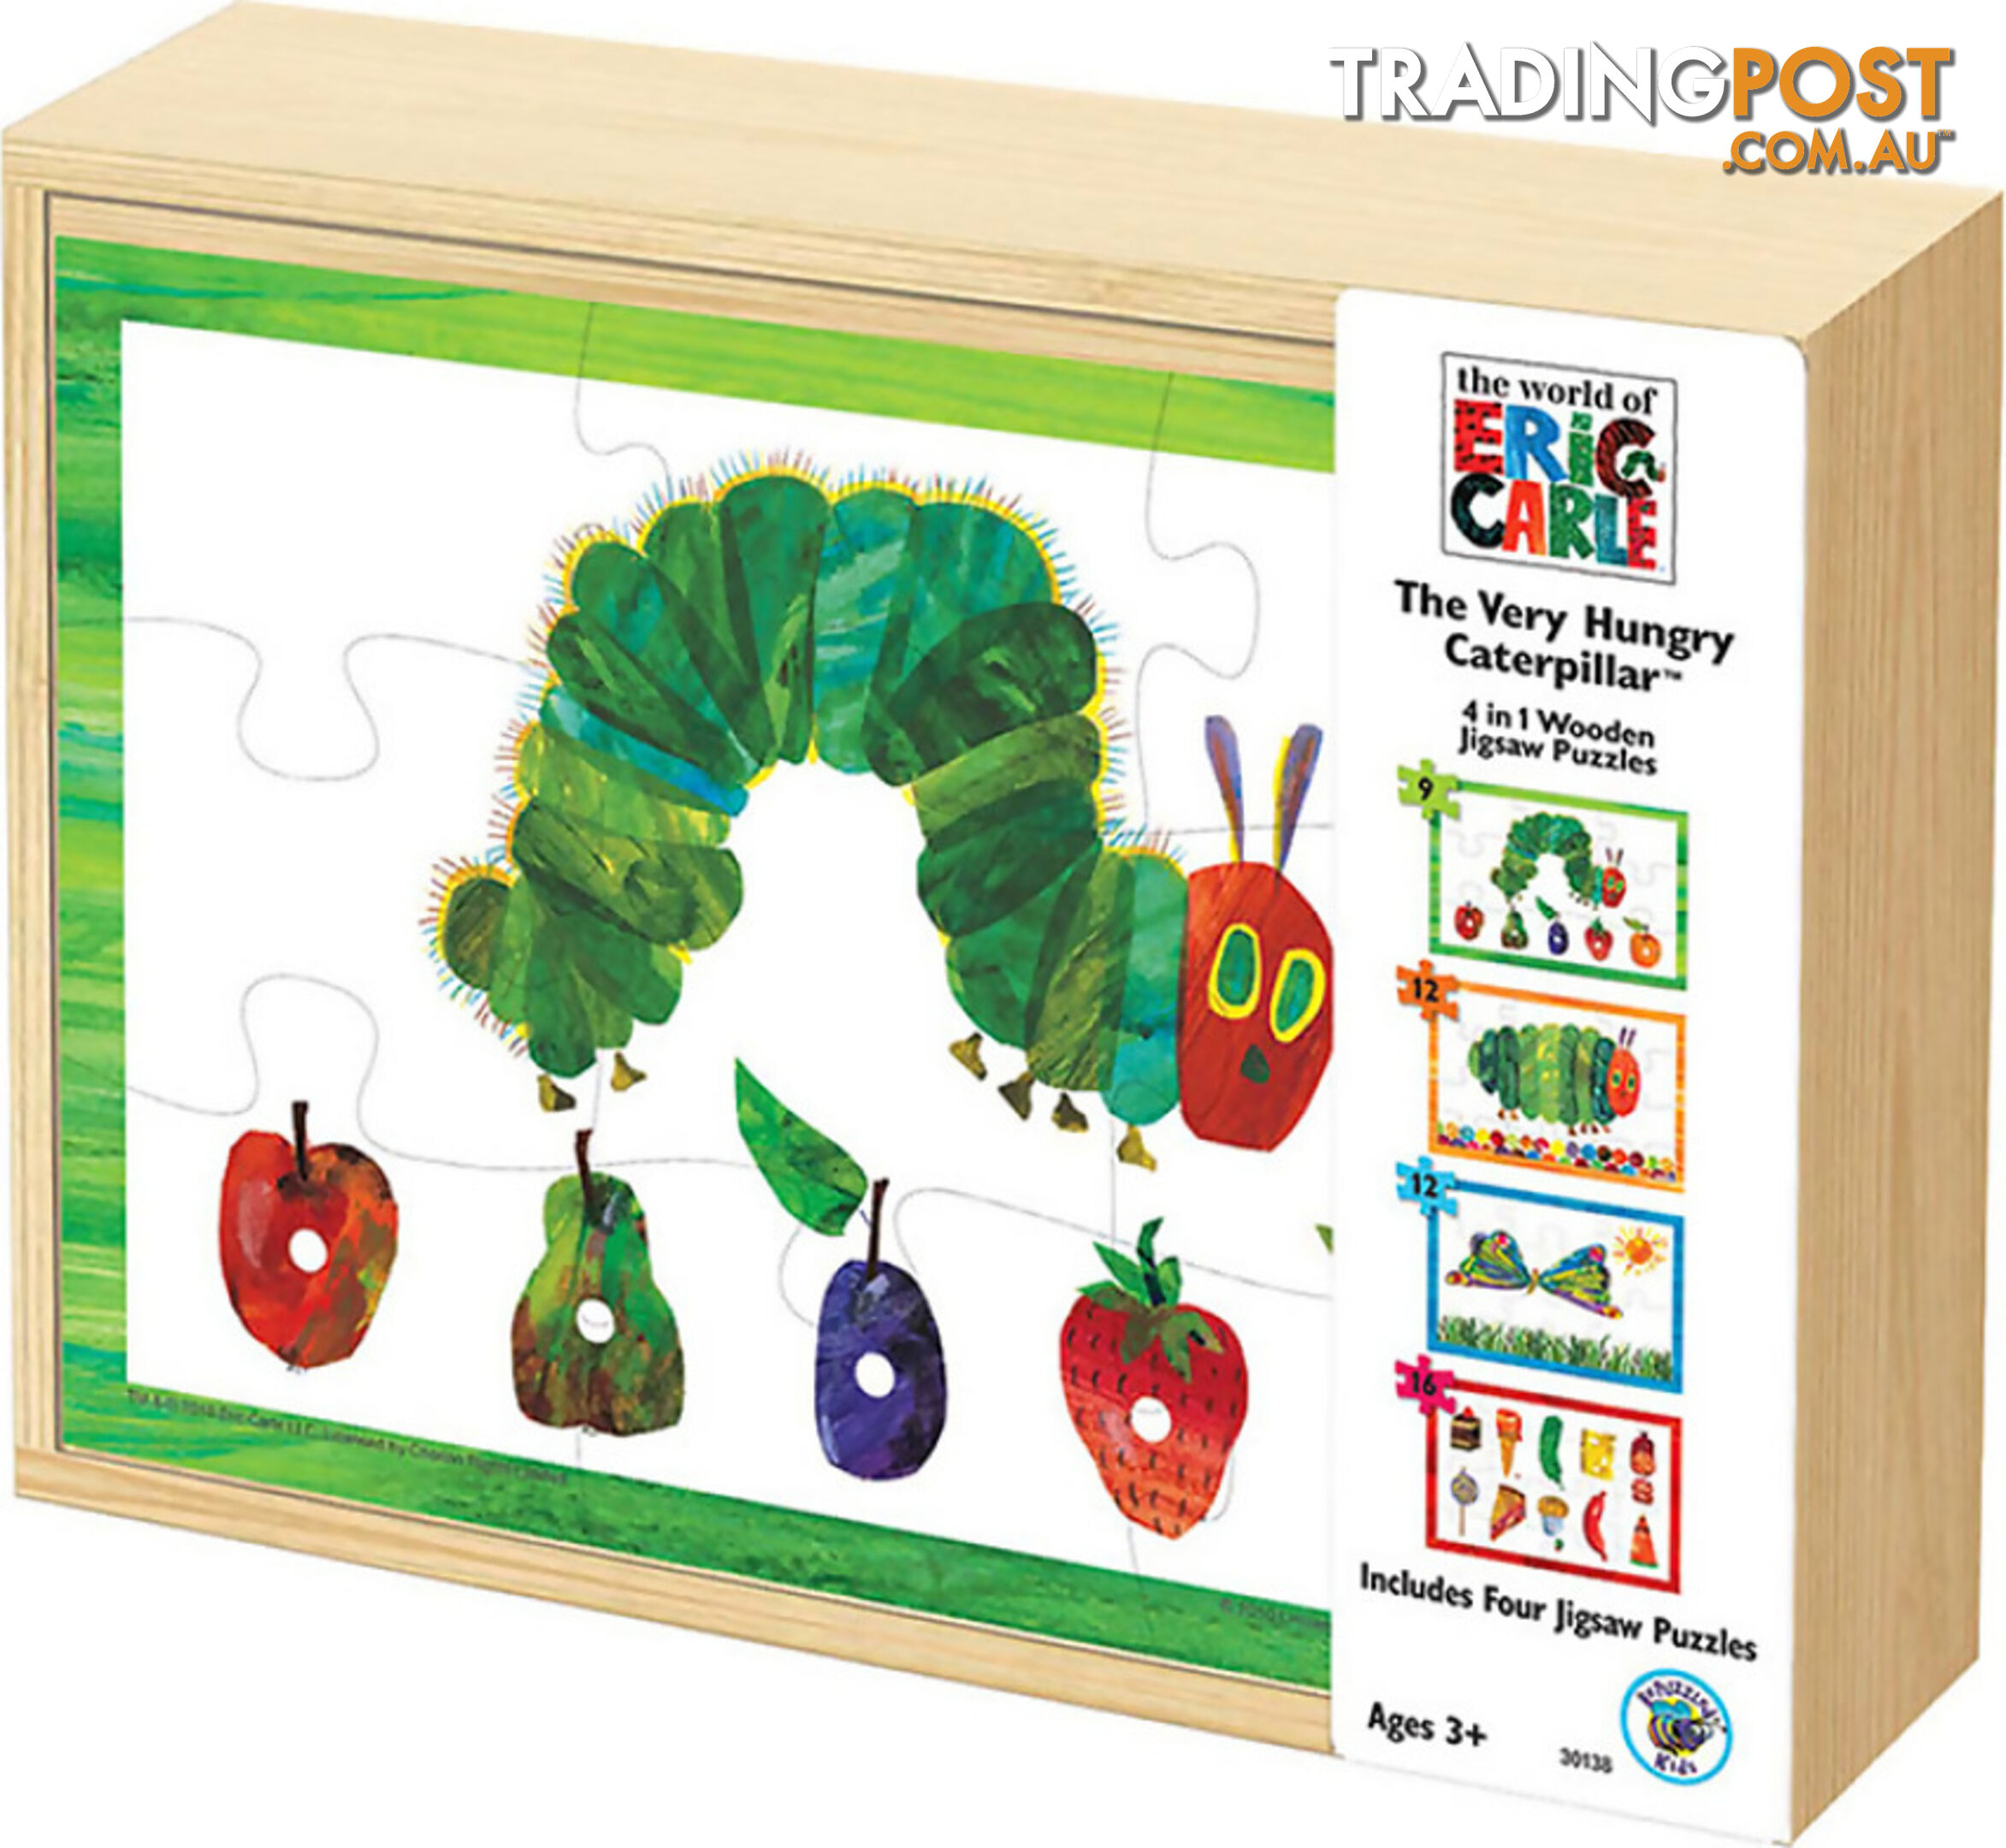 The Very Hungry Caterpillar 4 In 1 Wooden Jigsaw Puzzles - The World Of Eric Carle - Jduni30138 - 023332301386